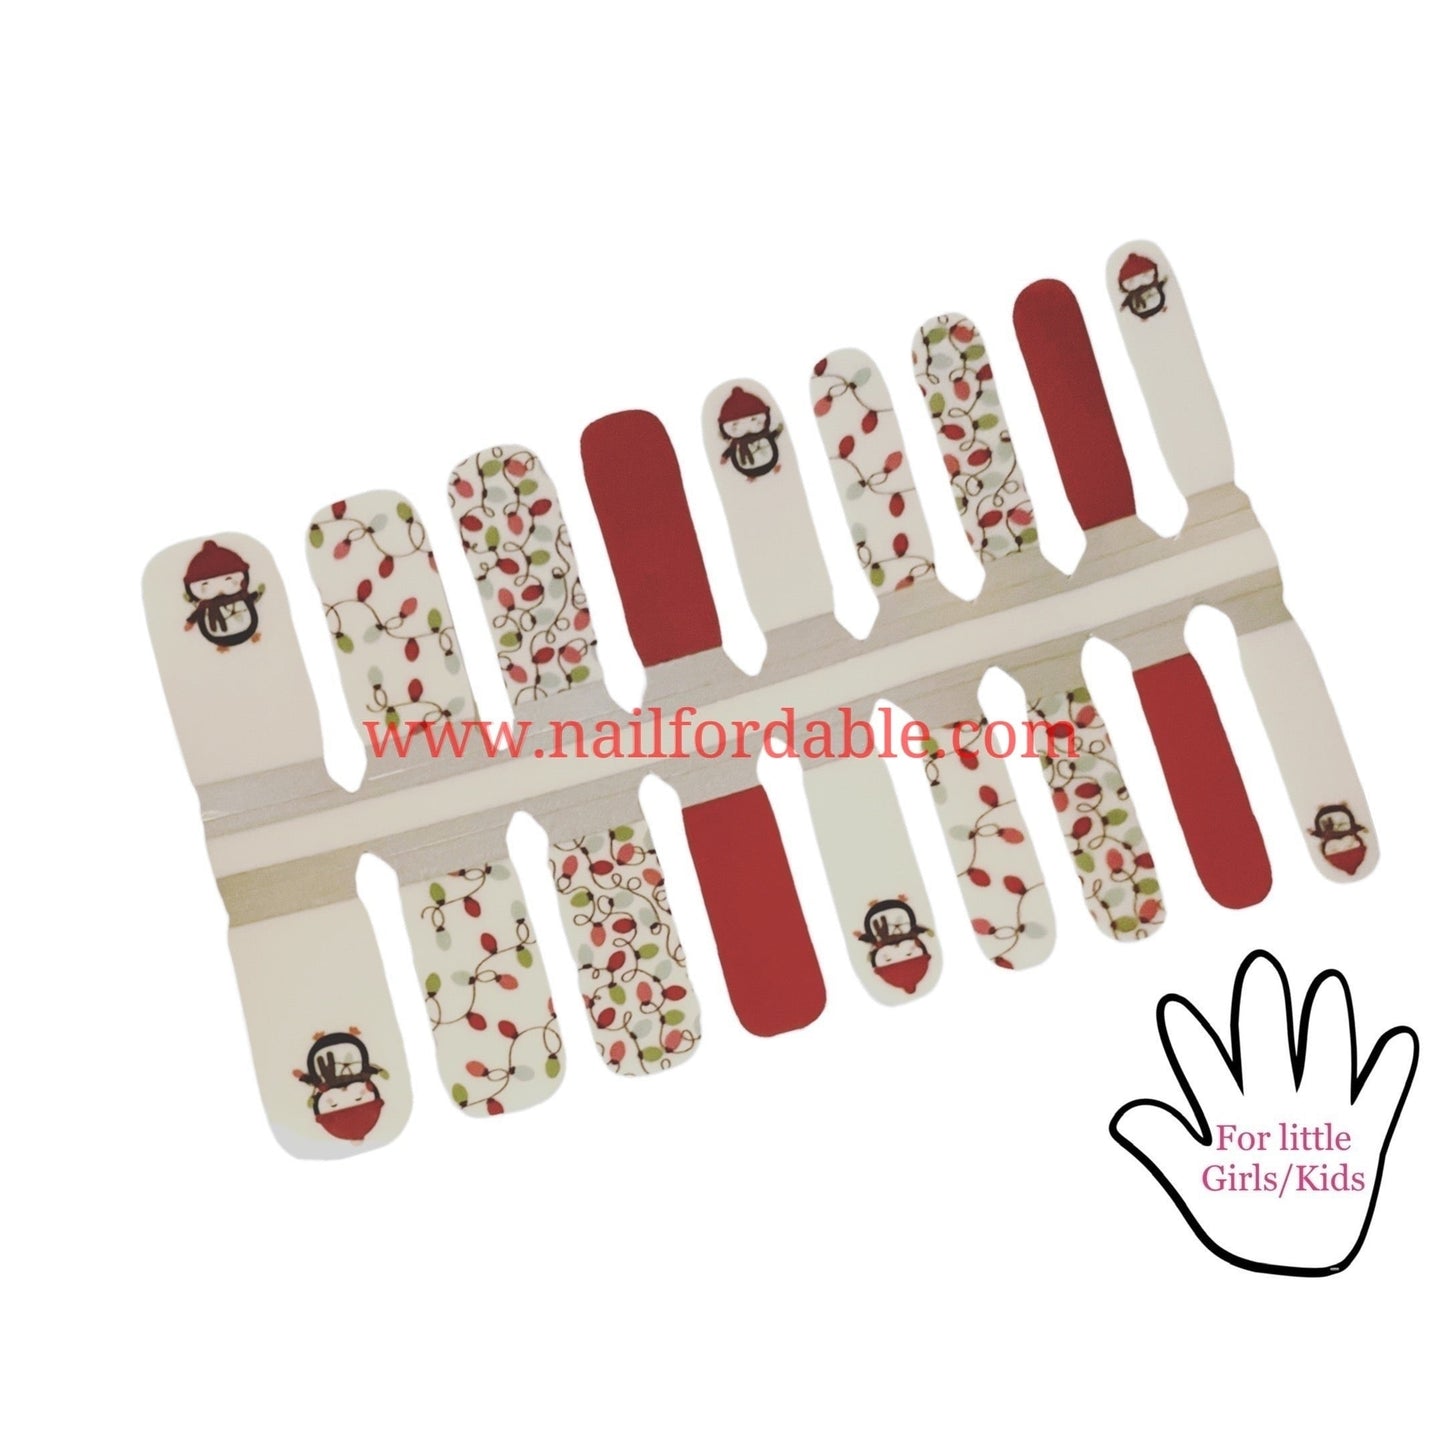 Christmas lights glow in the dark Nail Wraps | Semi Cured Gel Wraps | Gel Nail Wraps |Nail Polish | Nail Stickers